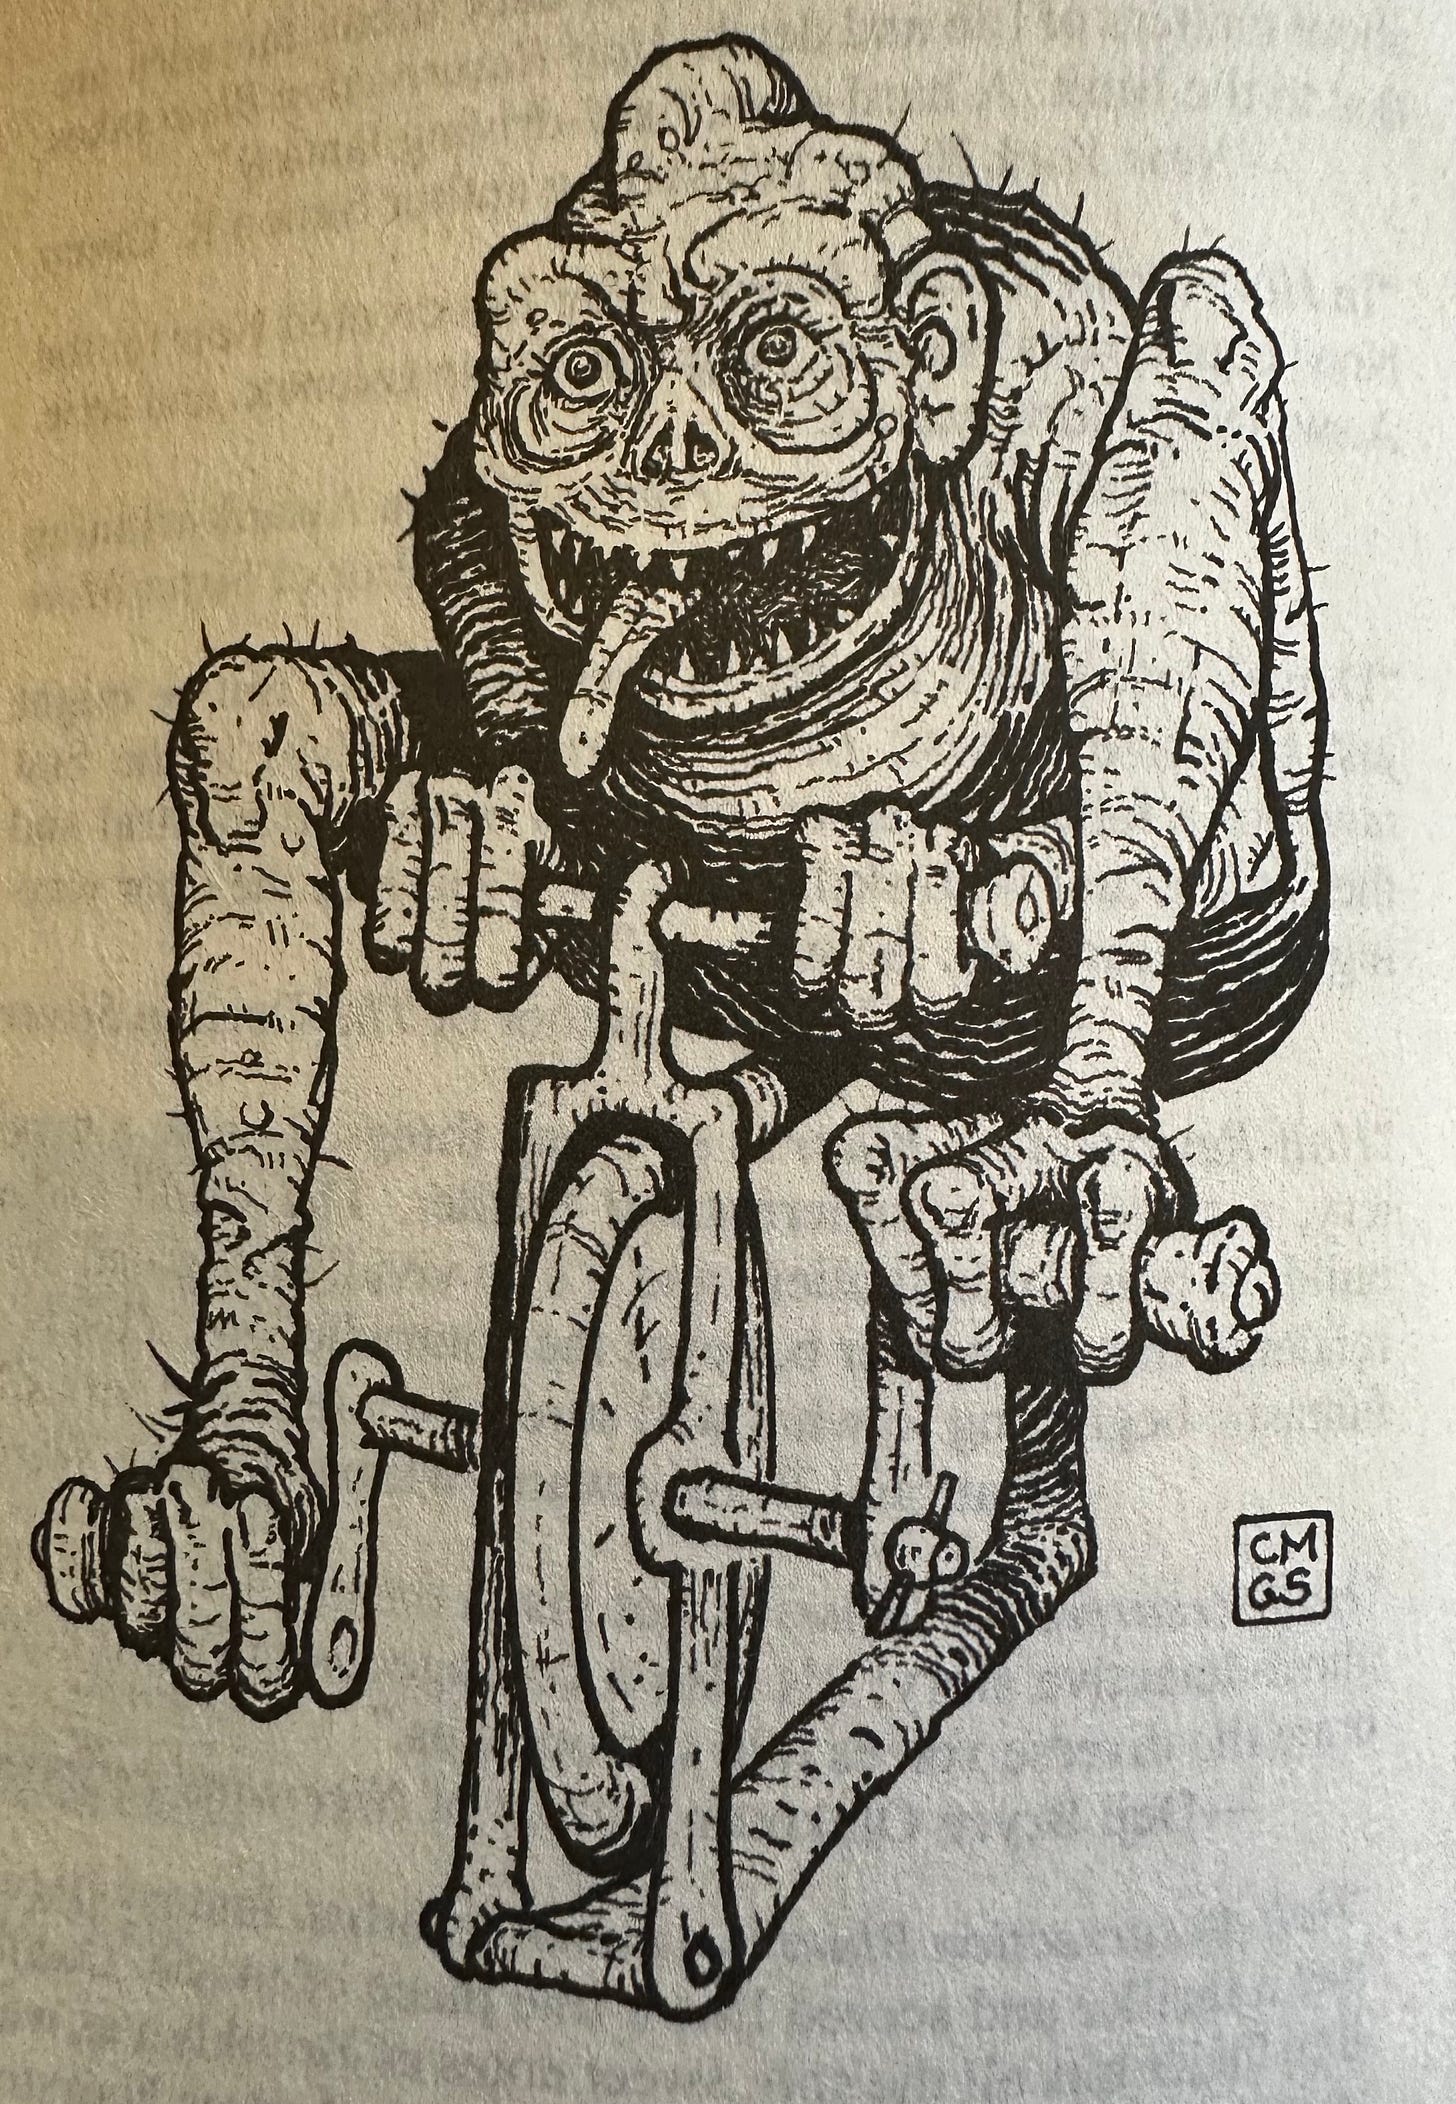 An illustration of a ngk on a medieval exercise bike looking device.